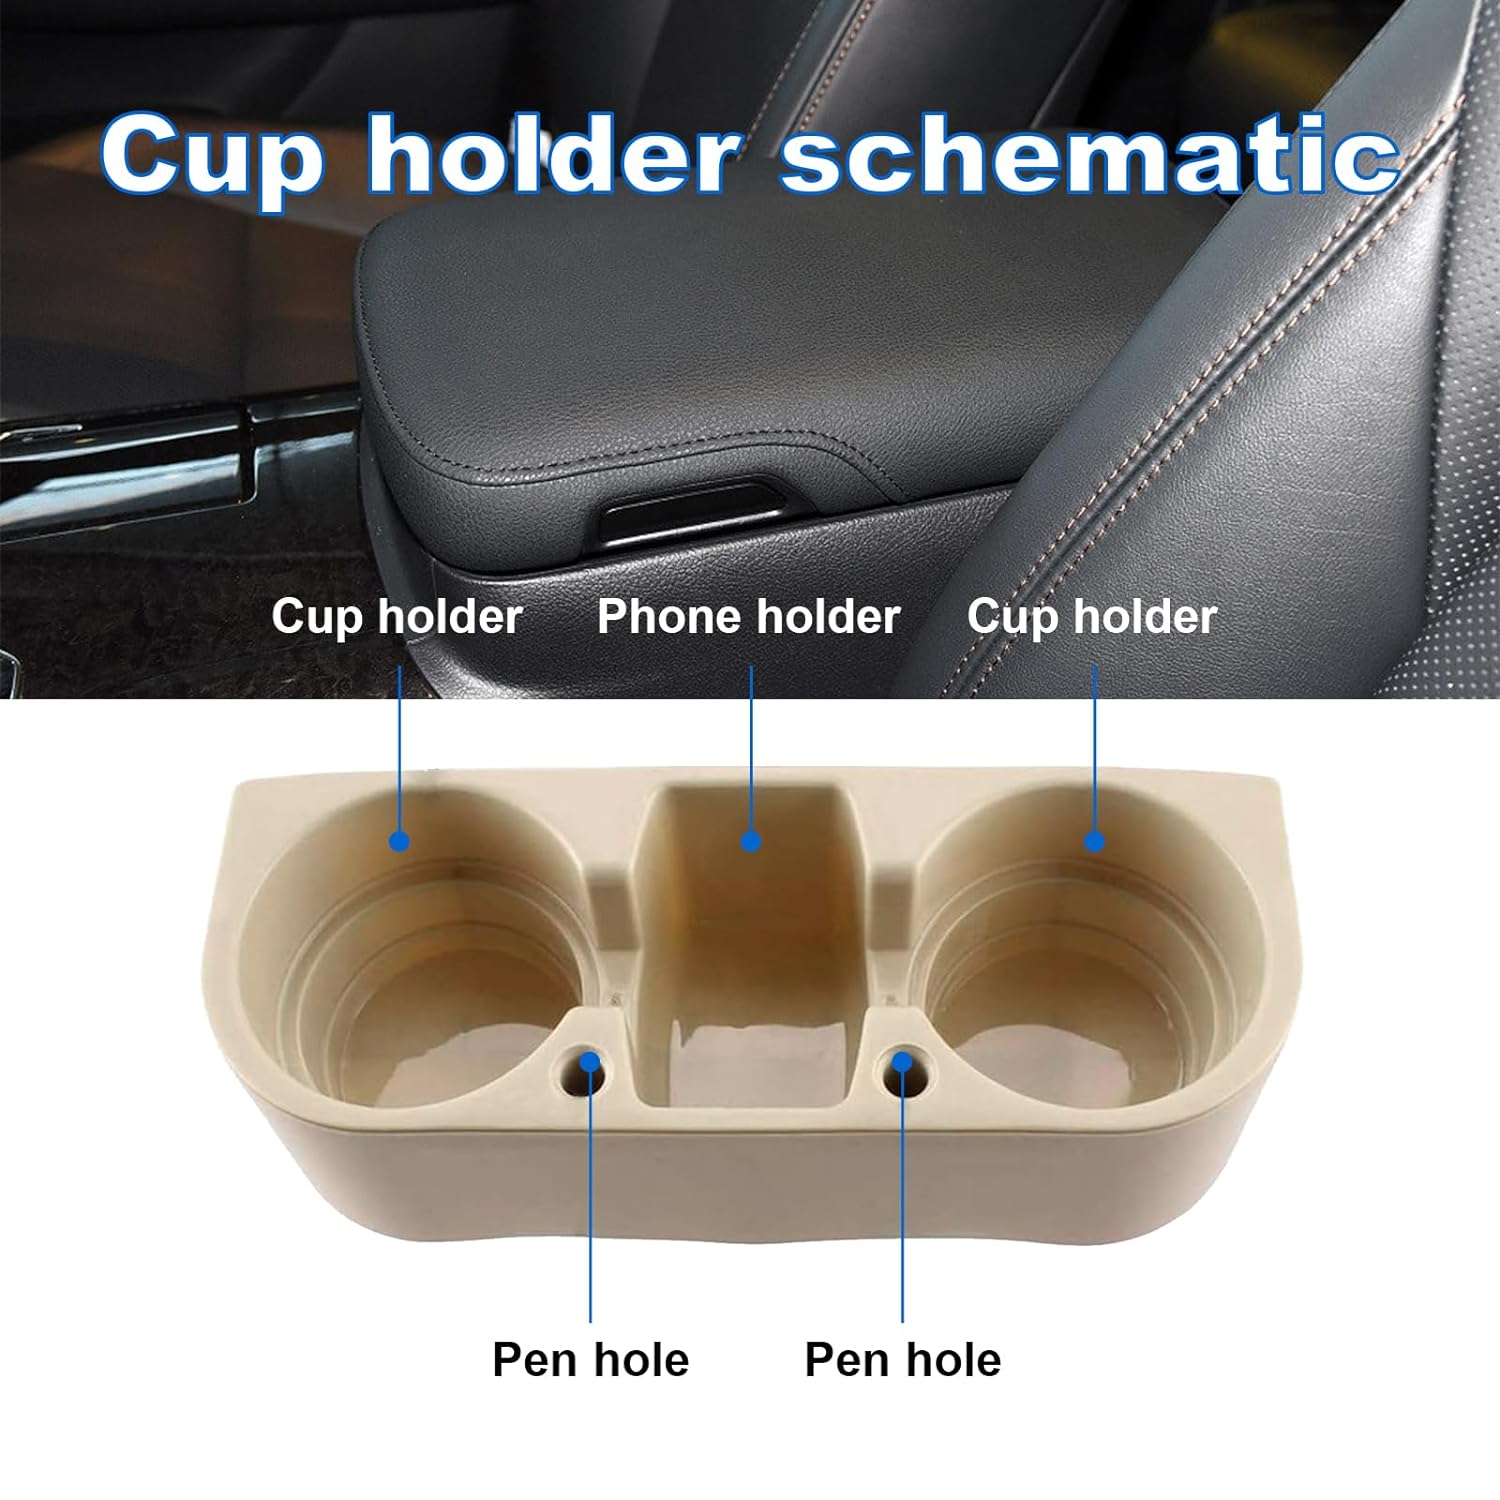 Augeny Car Cup Holder, Multifunctional Portable Center Console Armrest Storage Box Cup Holders, Vehicle Seat Gap Organizer for Mug Bottle Cell Phones Keys Coffee Coasters Cards (Beige)